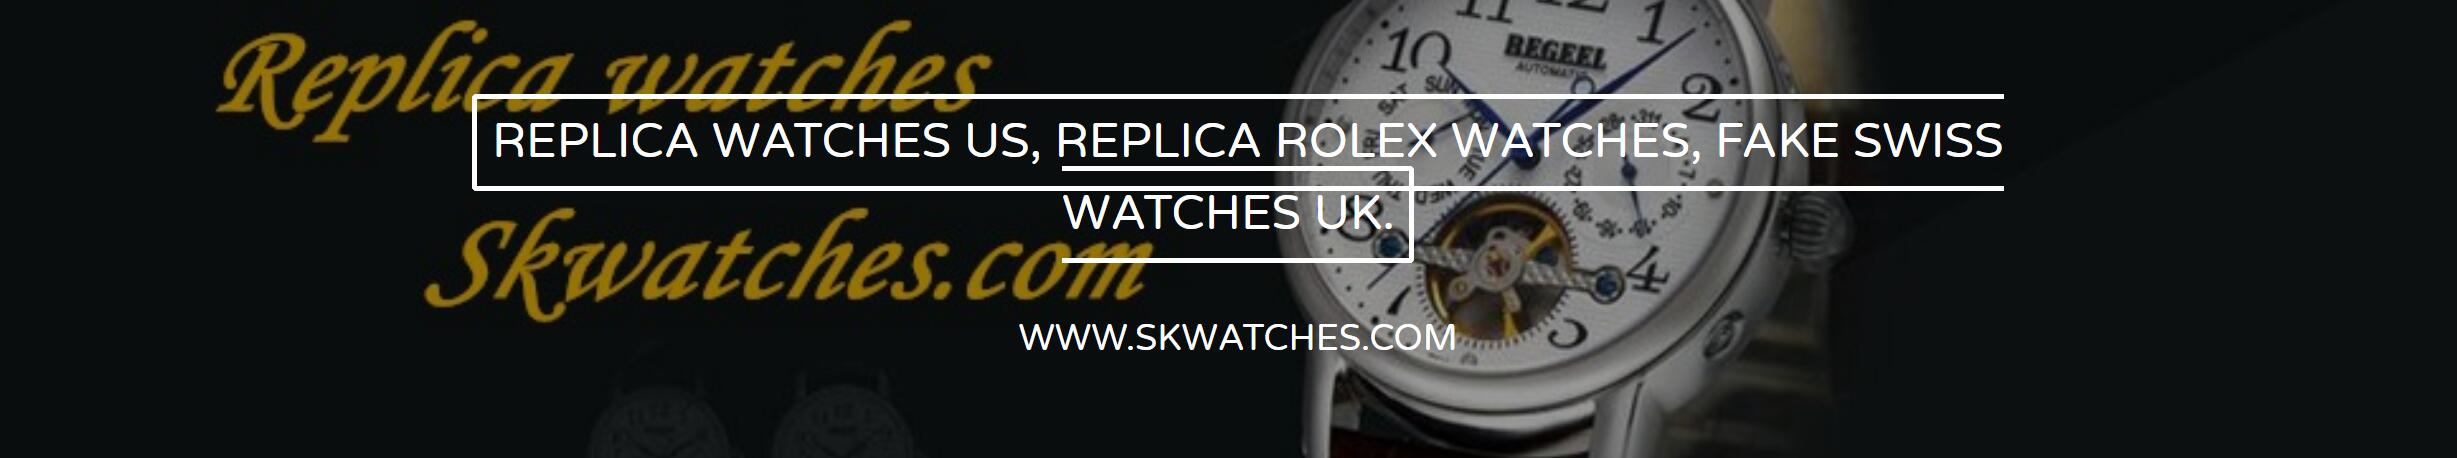 http://www.skwatches.com/